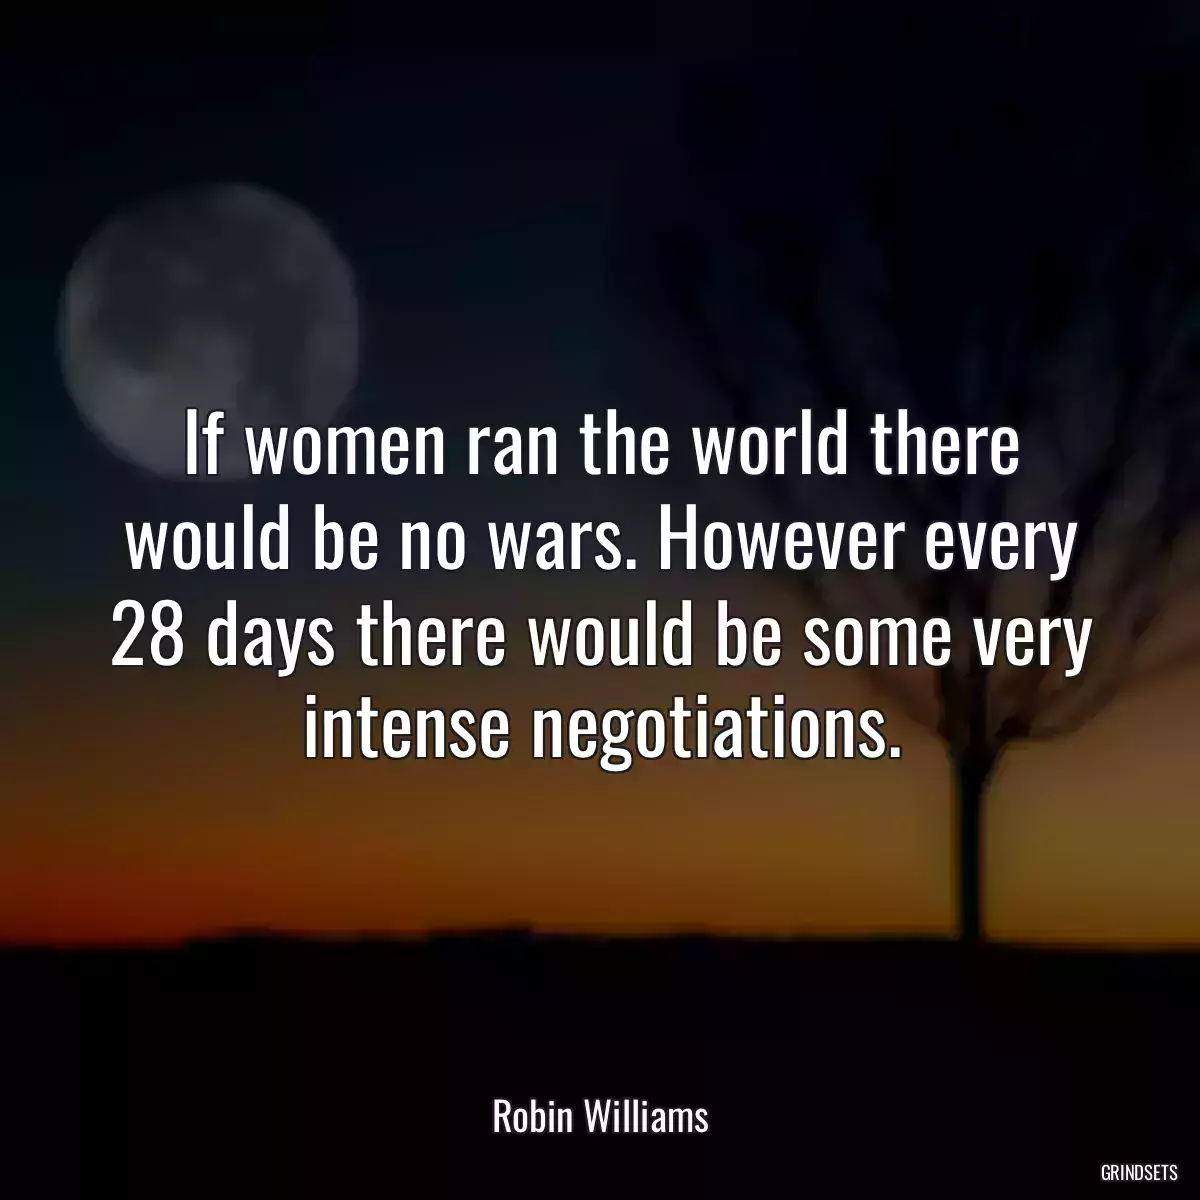 If women ran the world there would be no wars. However every 28 days there would be some very intense negotiations.